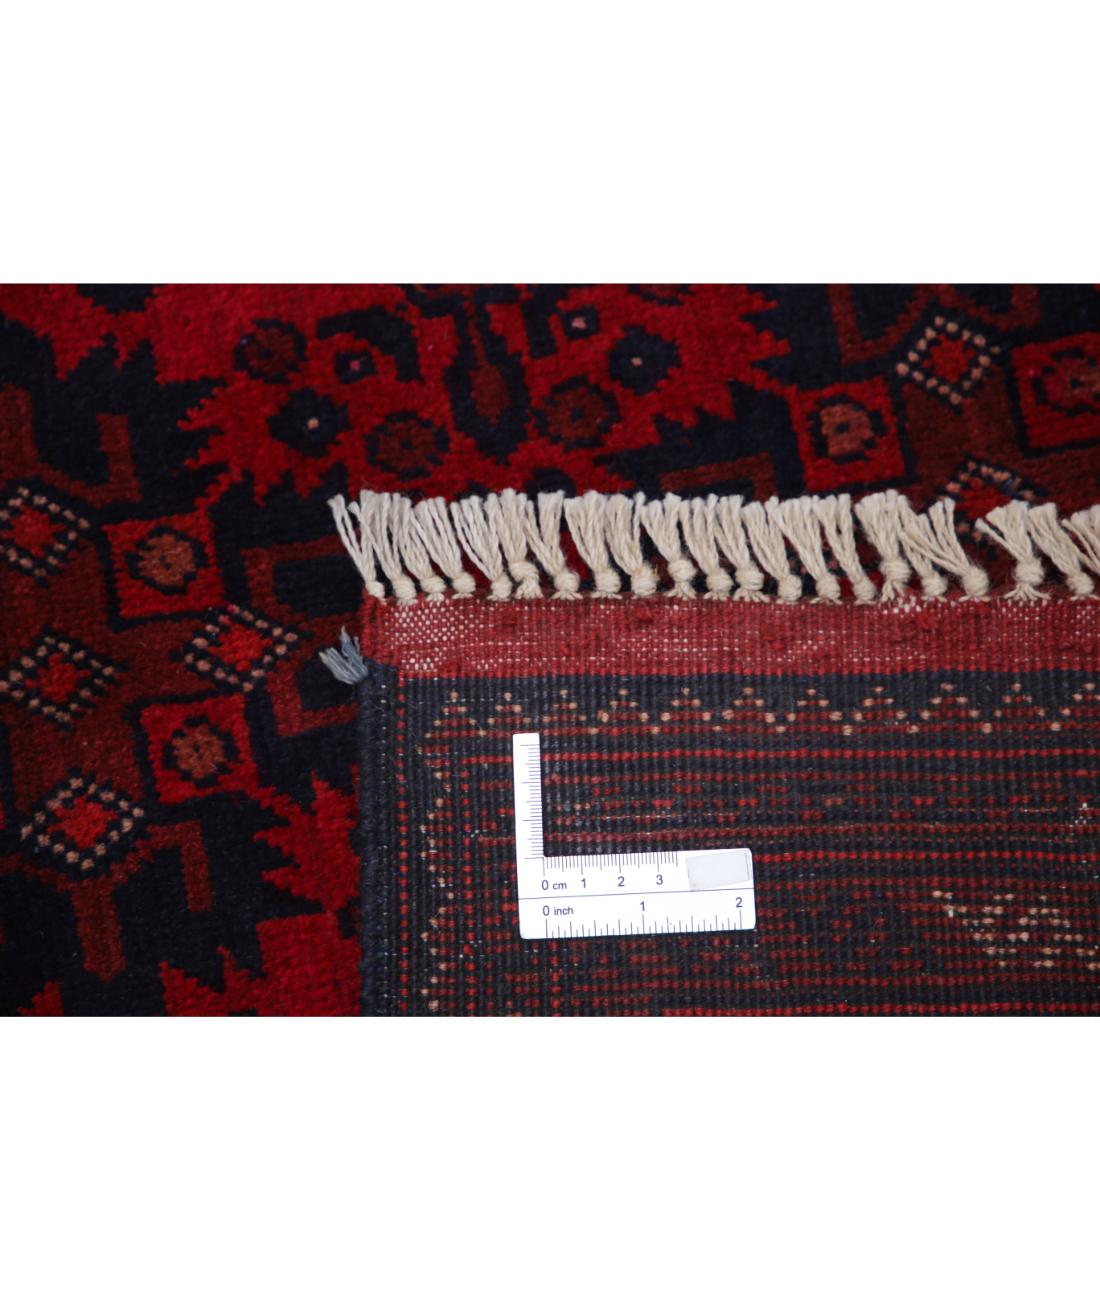 Hand Knotted Afghan Khal Muhammadi Wool Rug - 4'11'' x 6'4'' 4' 11" X 6' 4" (150 X 193) / Red / Blue